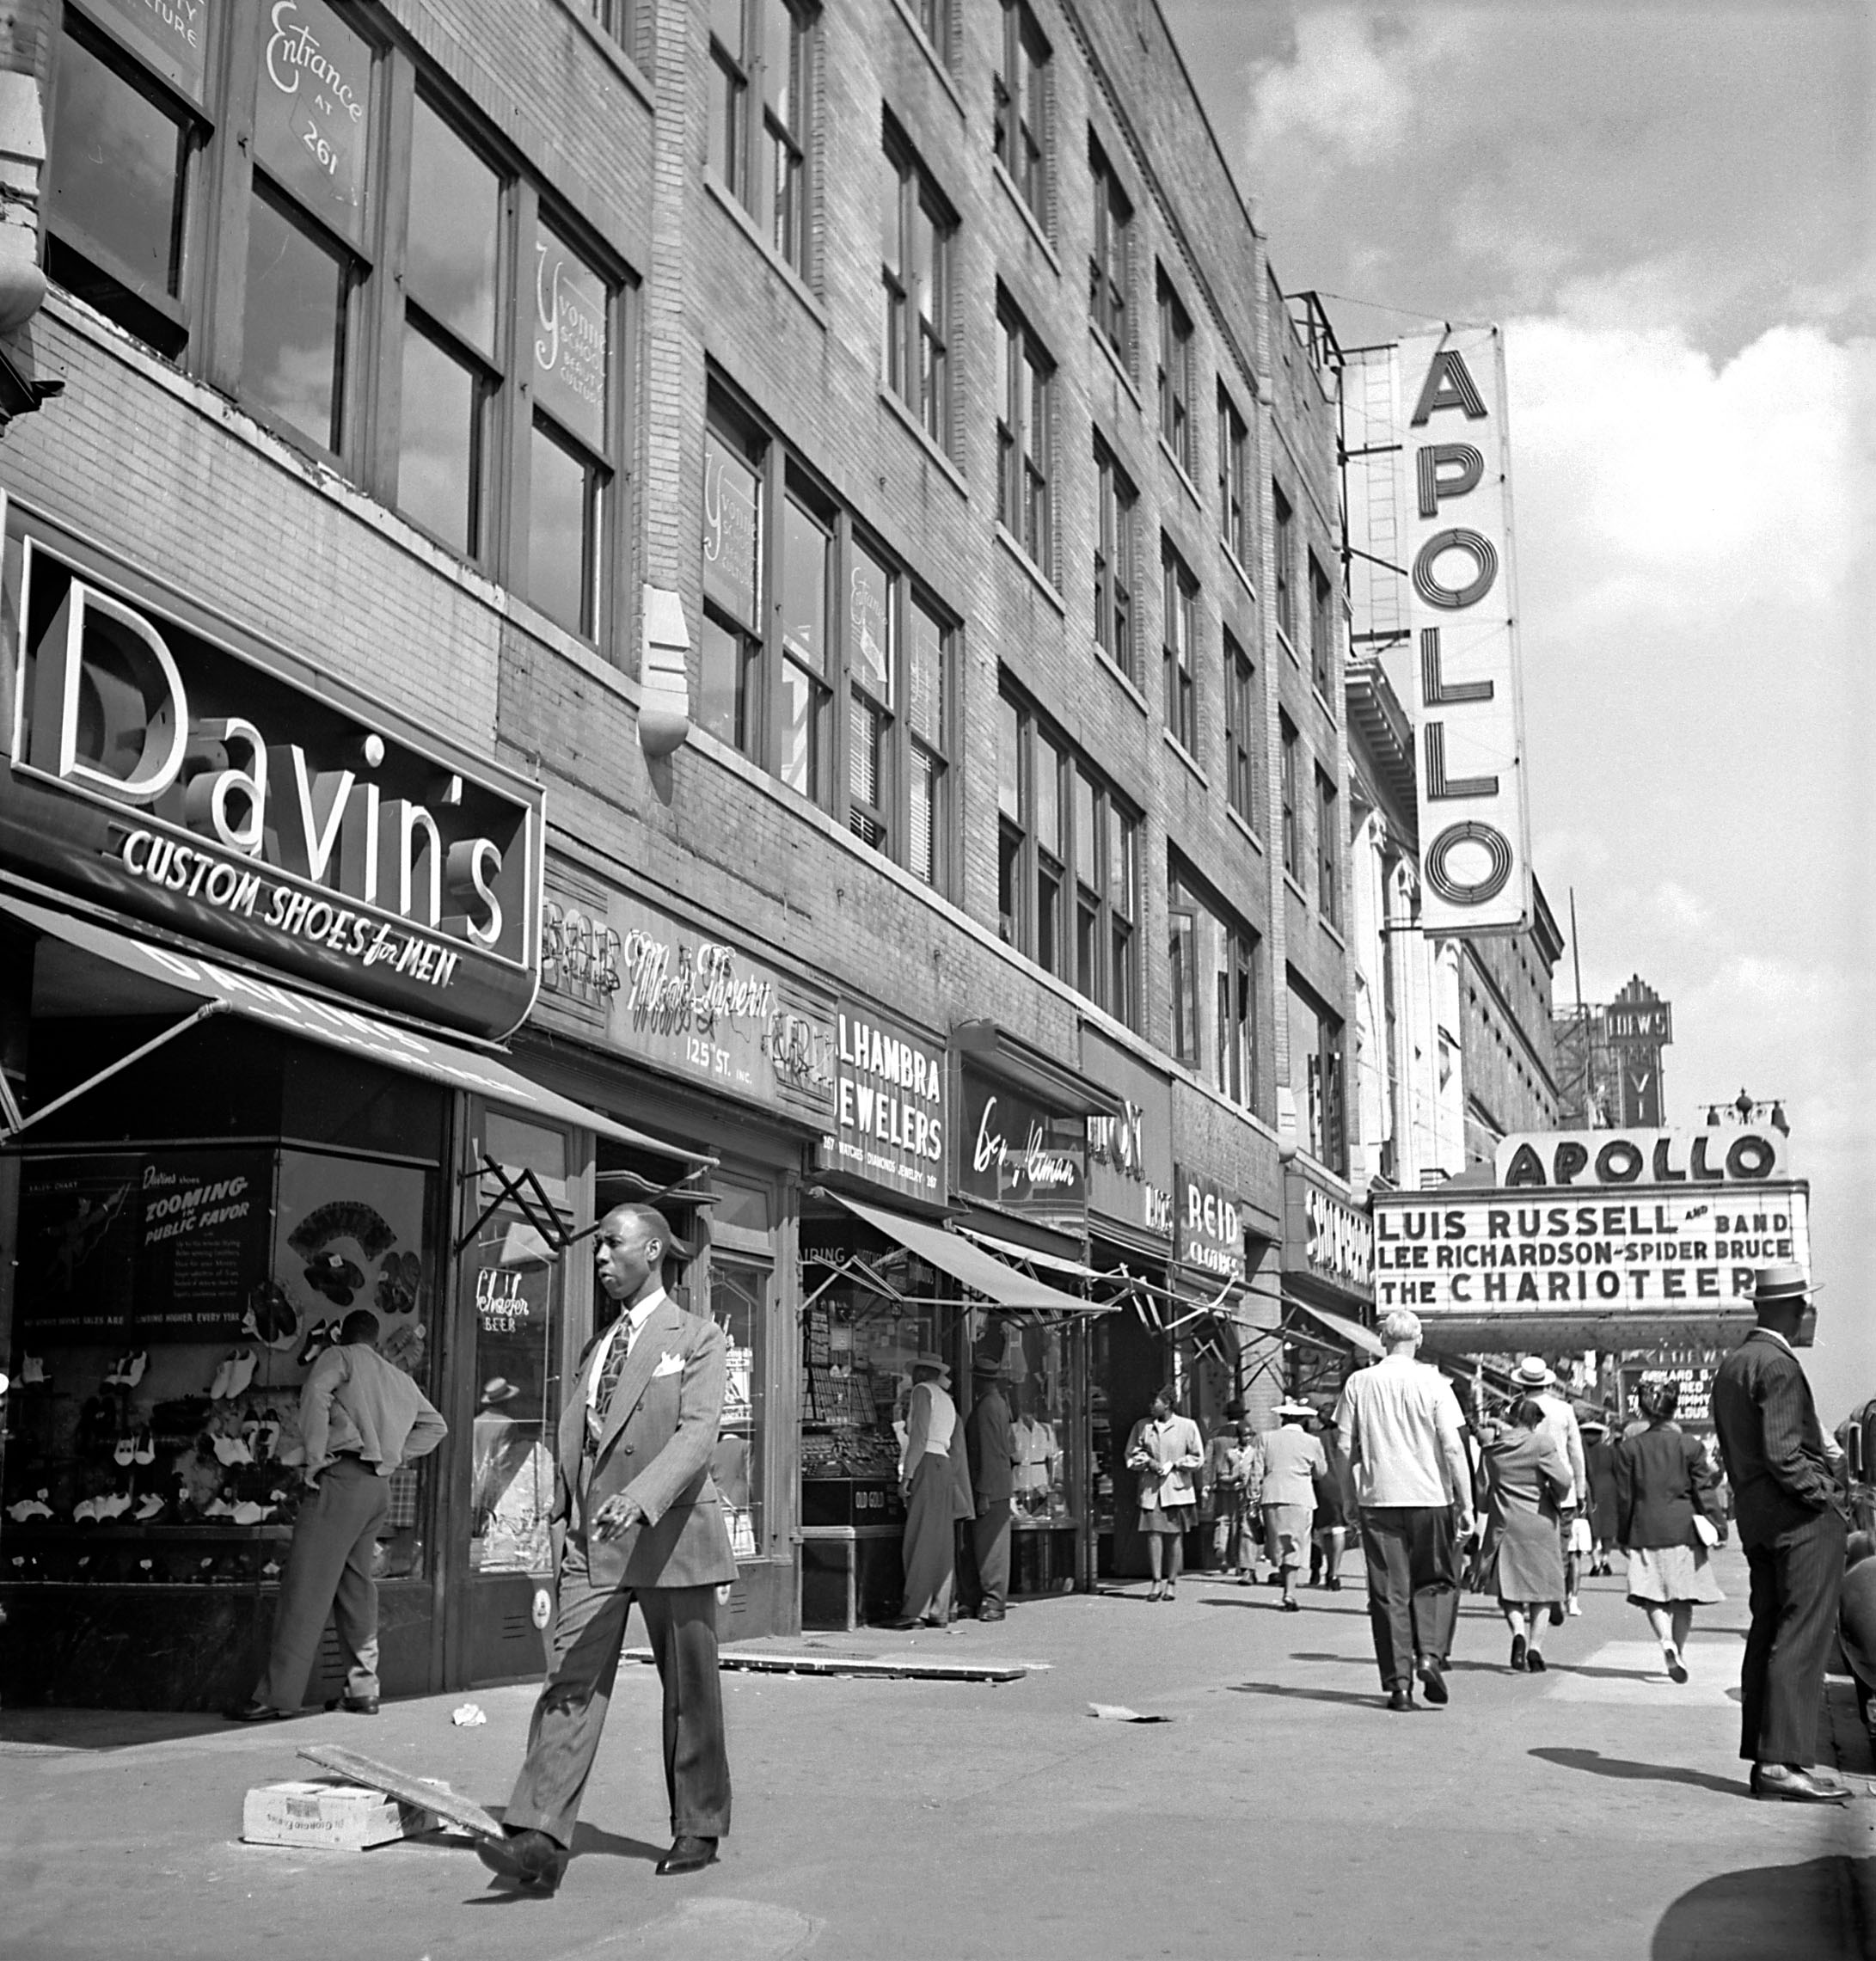 Harlem's famous jazz club the Apollo Theatre in the 1950s. 